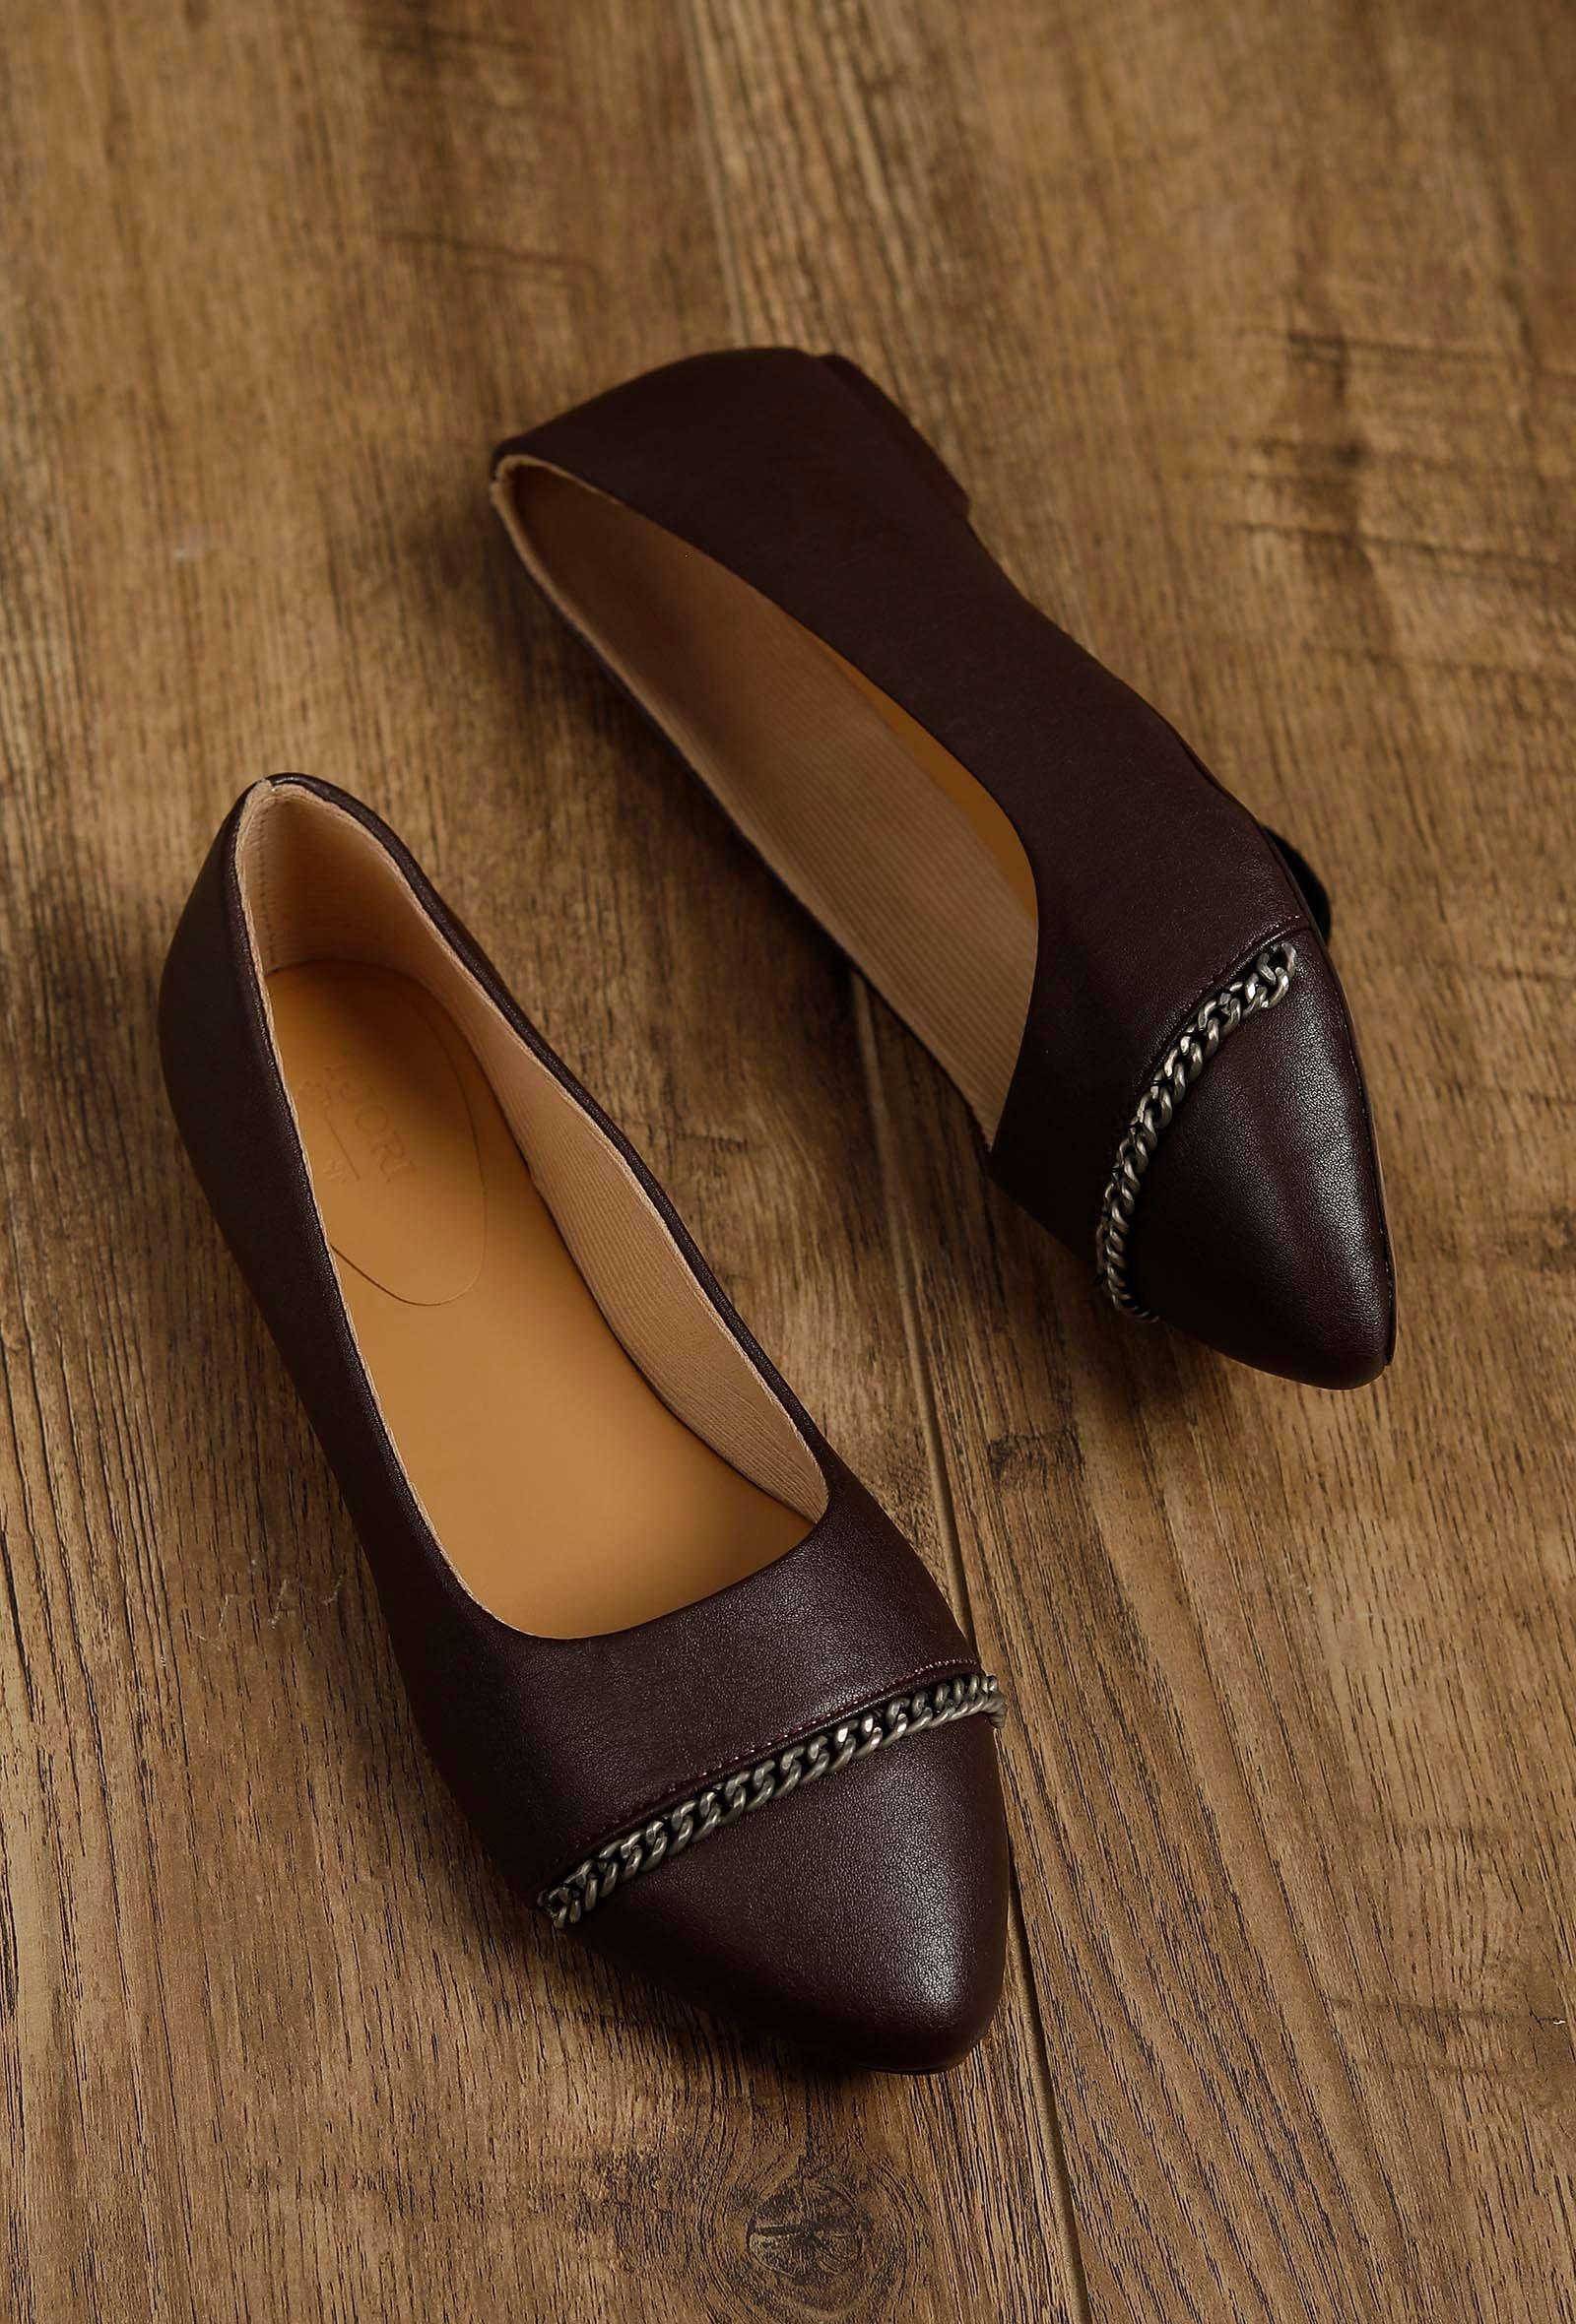 coco-brown-chain-cruelty-free-leather-mules